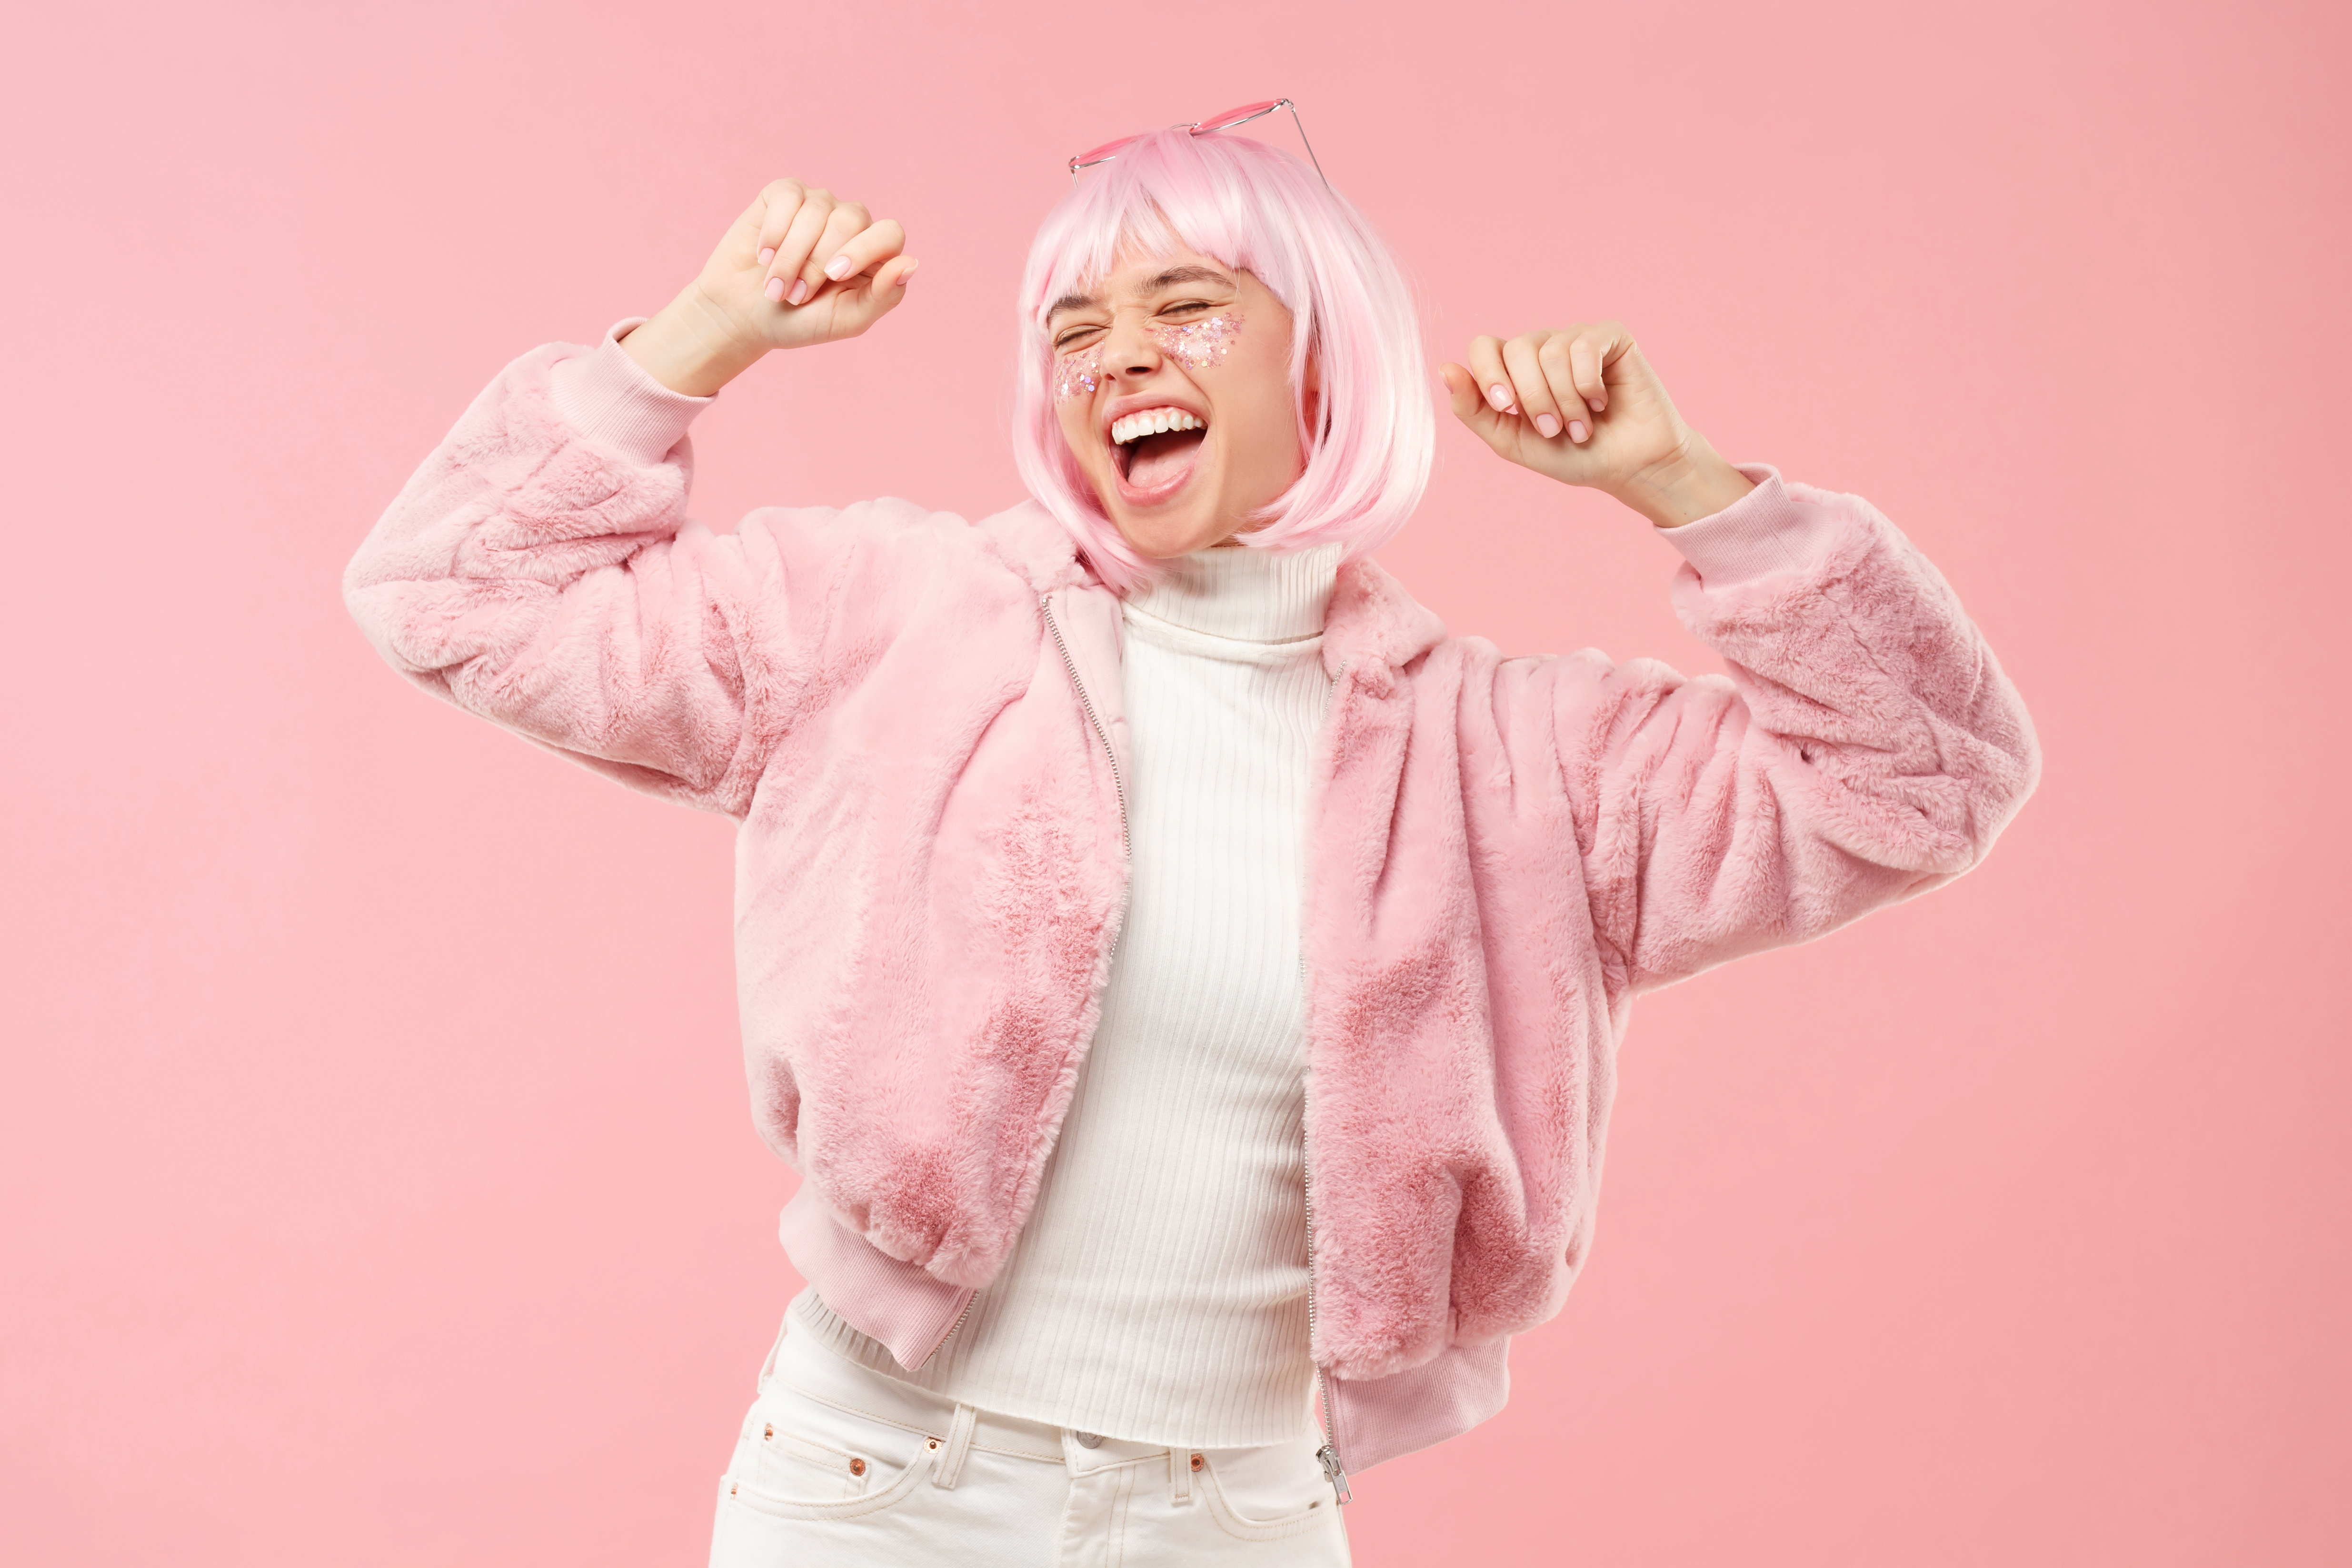 Excited teenage girl dancing and cheering to sounds of music, wearing fluffy fur coat and colored hair at party, isolated on pink background | Source: Getty Images